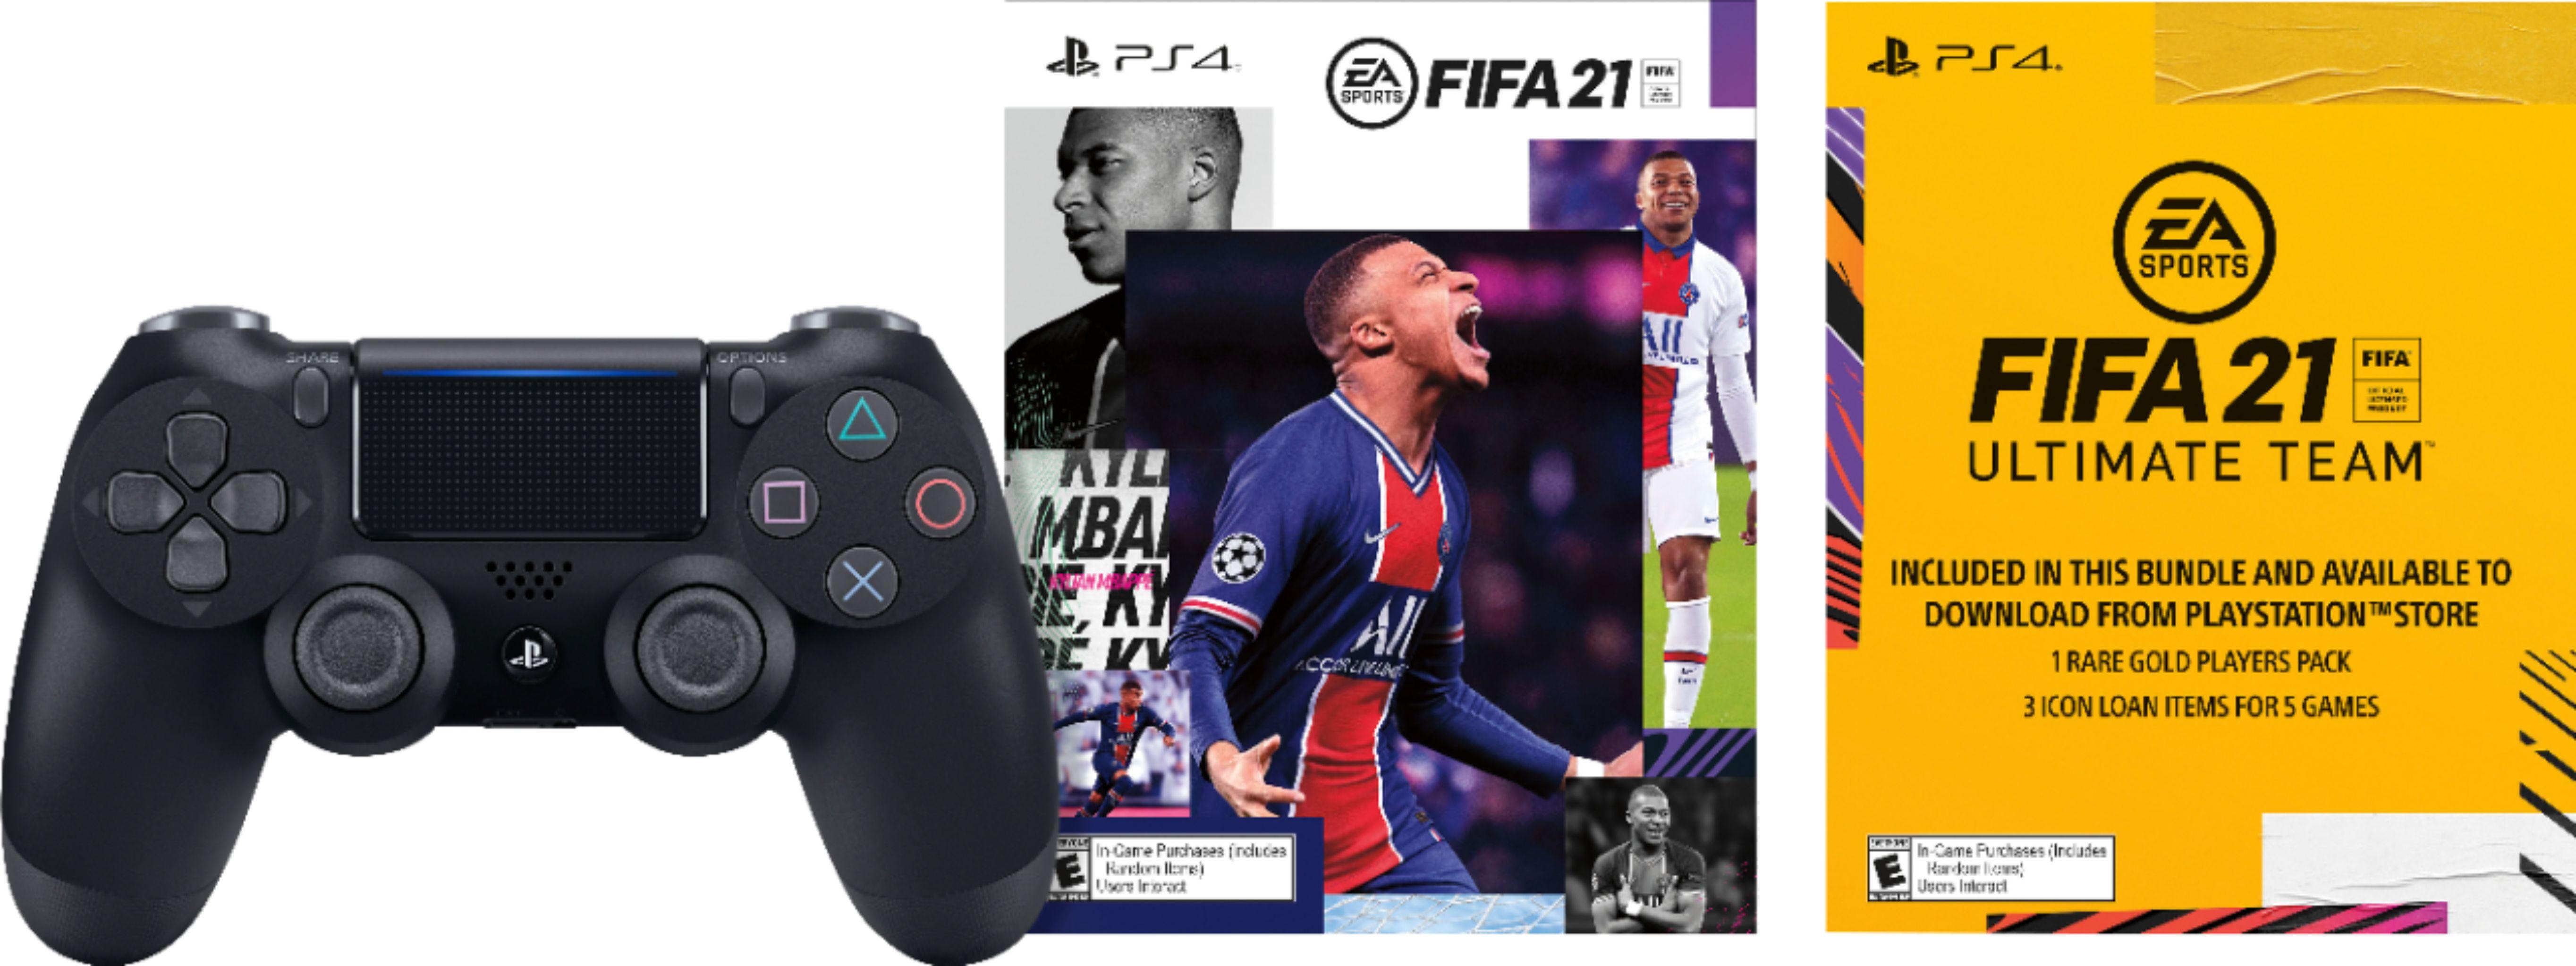 Sony DualShock 4 Controller with EA Sports FIFA 21 for $49.99 Shipped